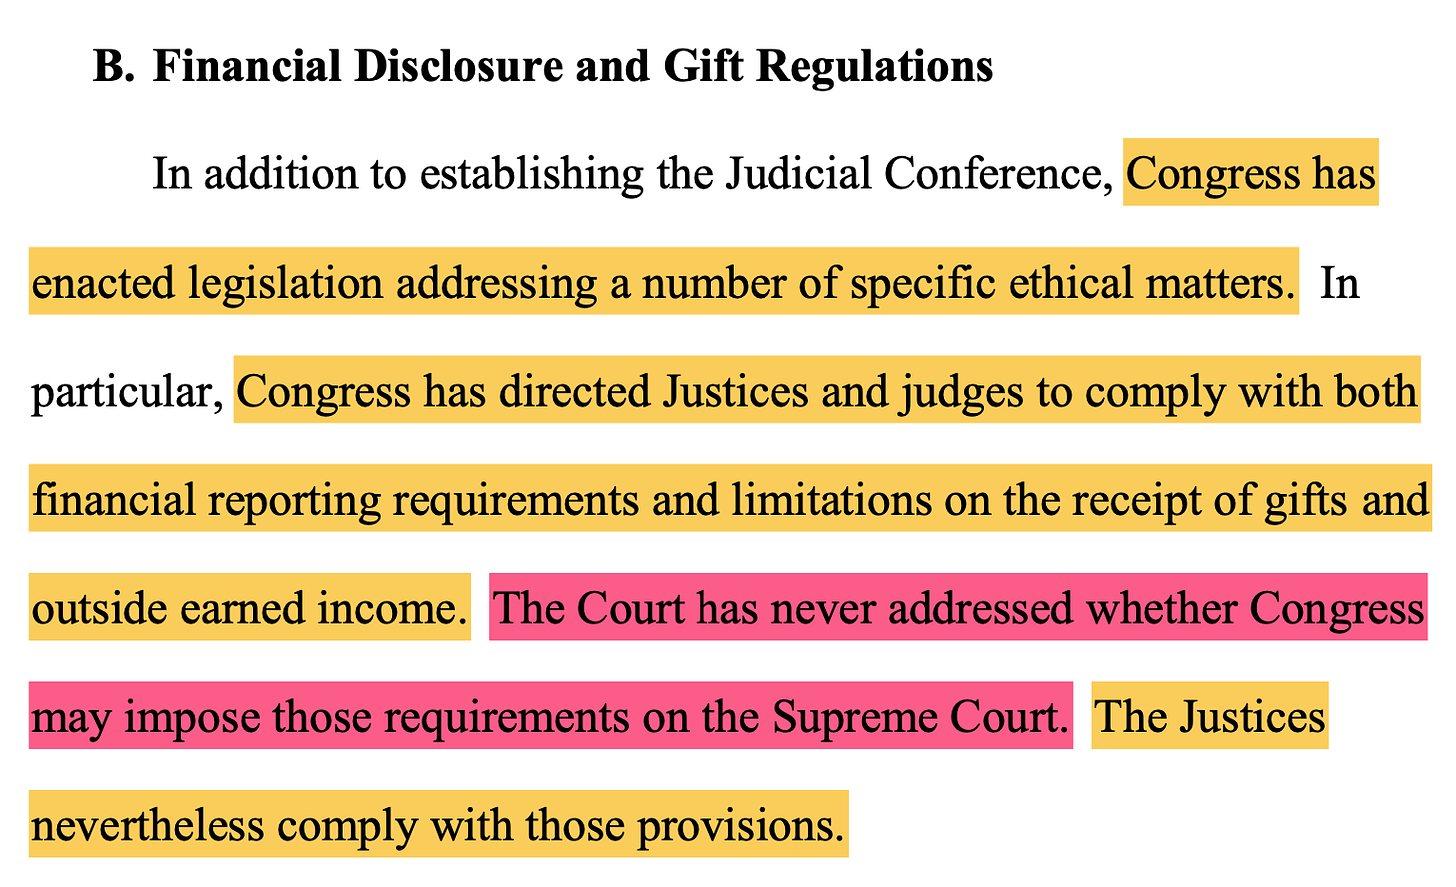 B. Financial Disclosure and Gift Regulations In addition to establishing the Judicial Conference, Congress has enacted legislation addressing a number of specific ethical matters. In particular, Congress has directed Justices and judges to comply with both financial reporting requirements and limitations on the receipt of gifts and outside earned income. The Court has never addressed whether Congress may impose those requirements on the Supreme Court. The Justices nevertheless comply with those provisions.